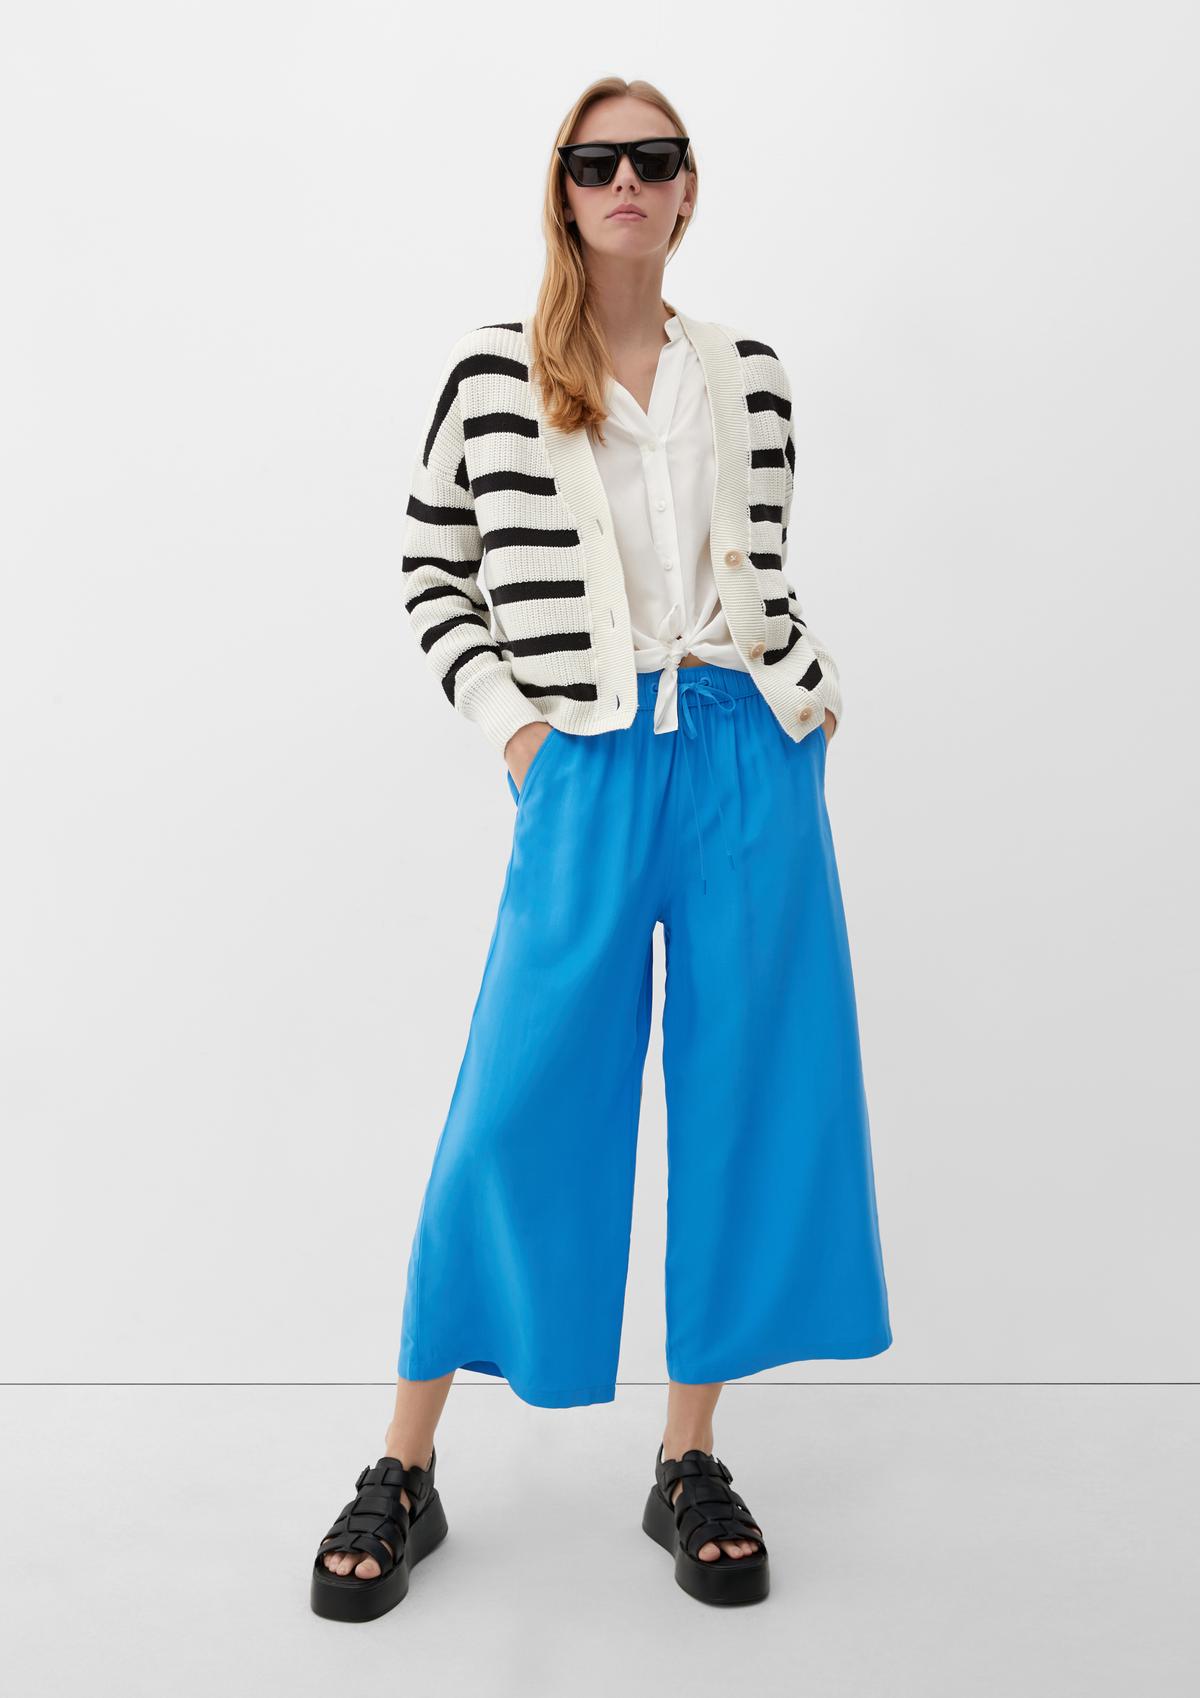 s.Oliver Culottes: trousers with a wide leg